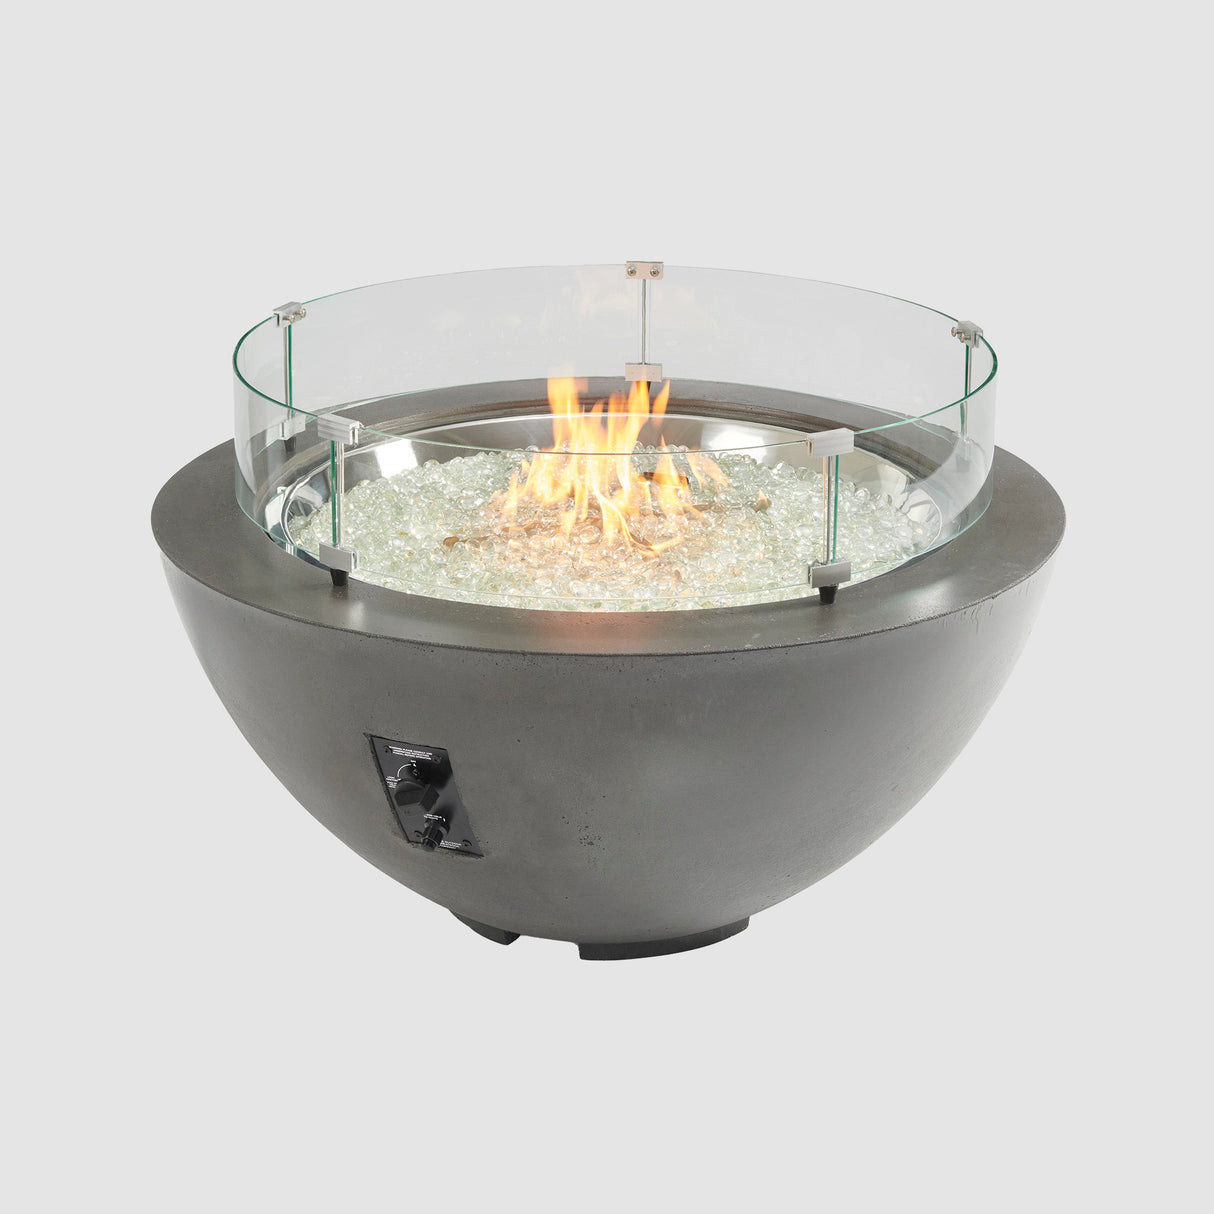 A glass wind guard placed on the top of a Midnight Mist Cove Round Gas Fire Pit Bowl 42"